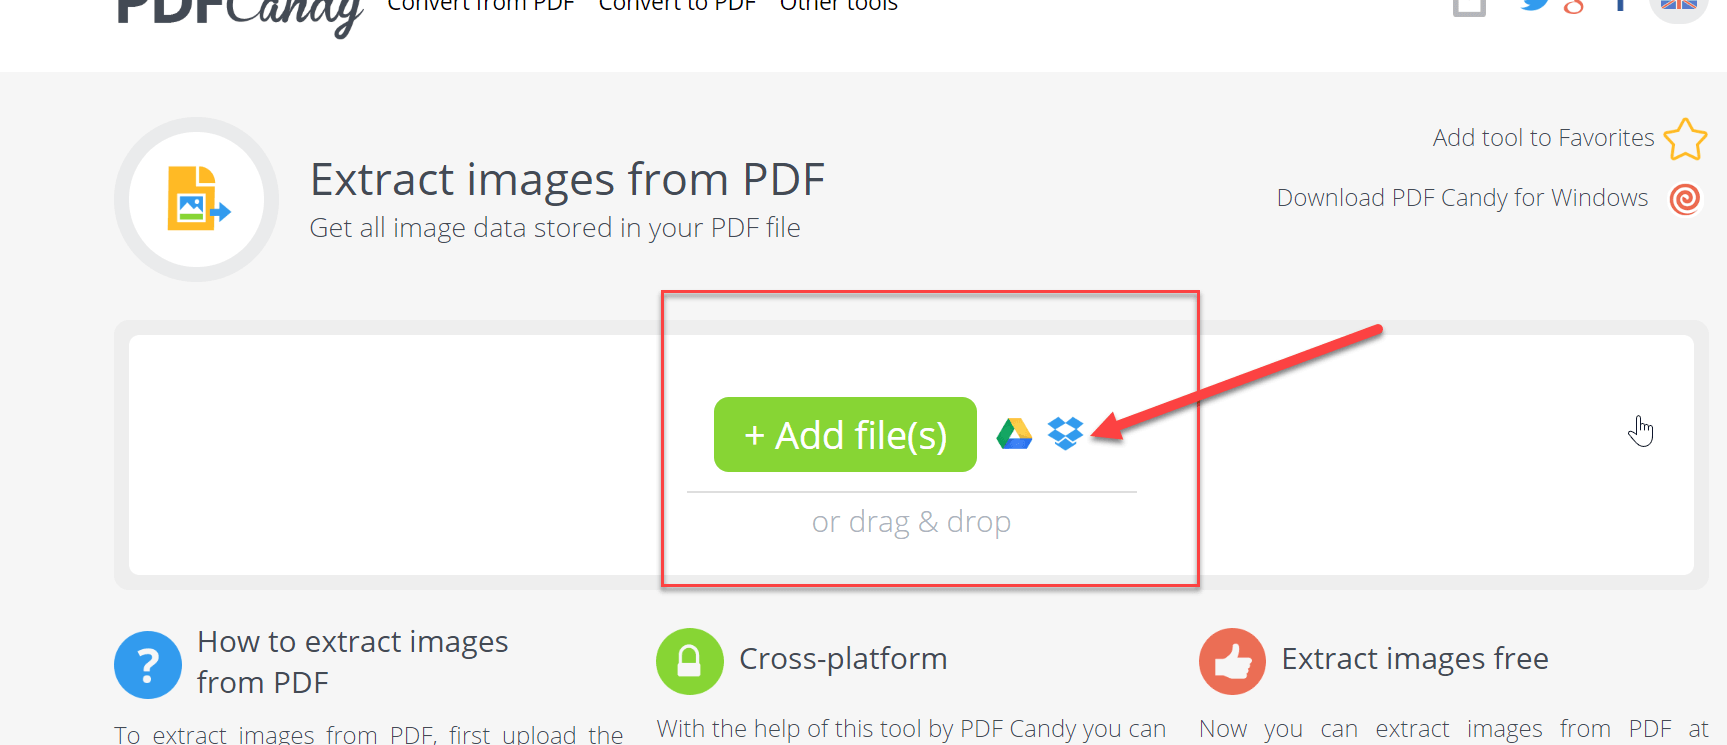 Go to pdfcandy.com then select Extract Images then select the PDF file